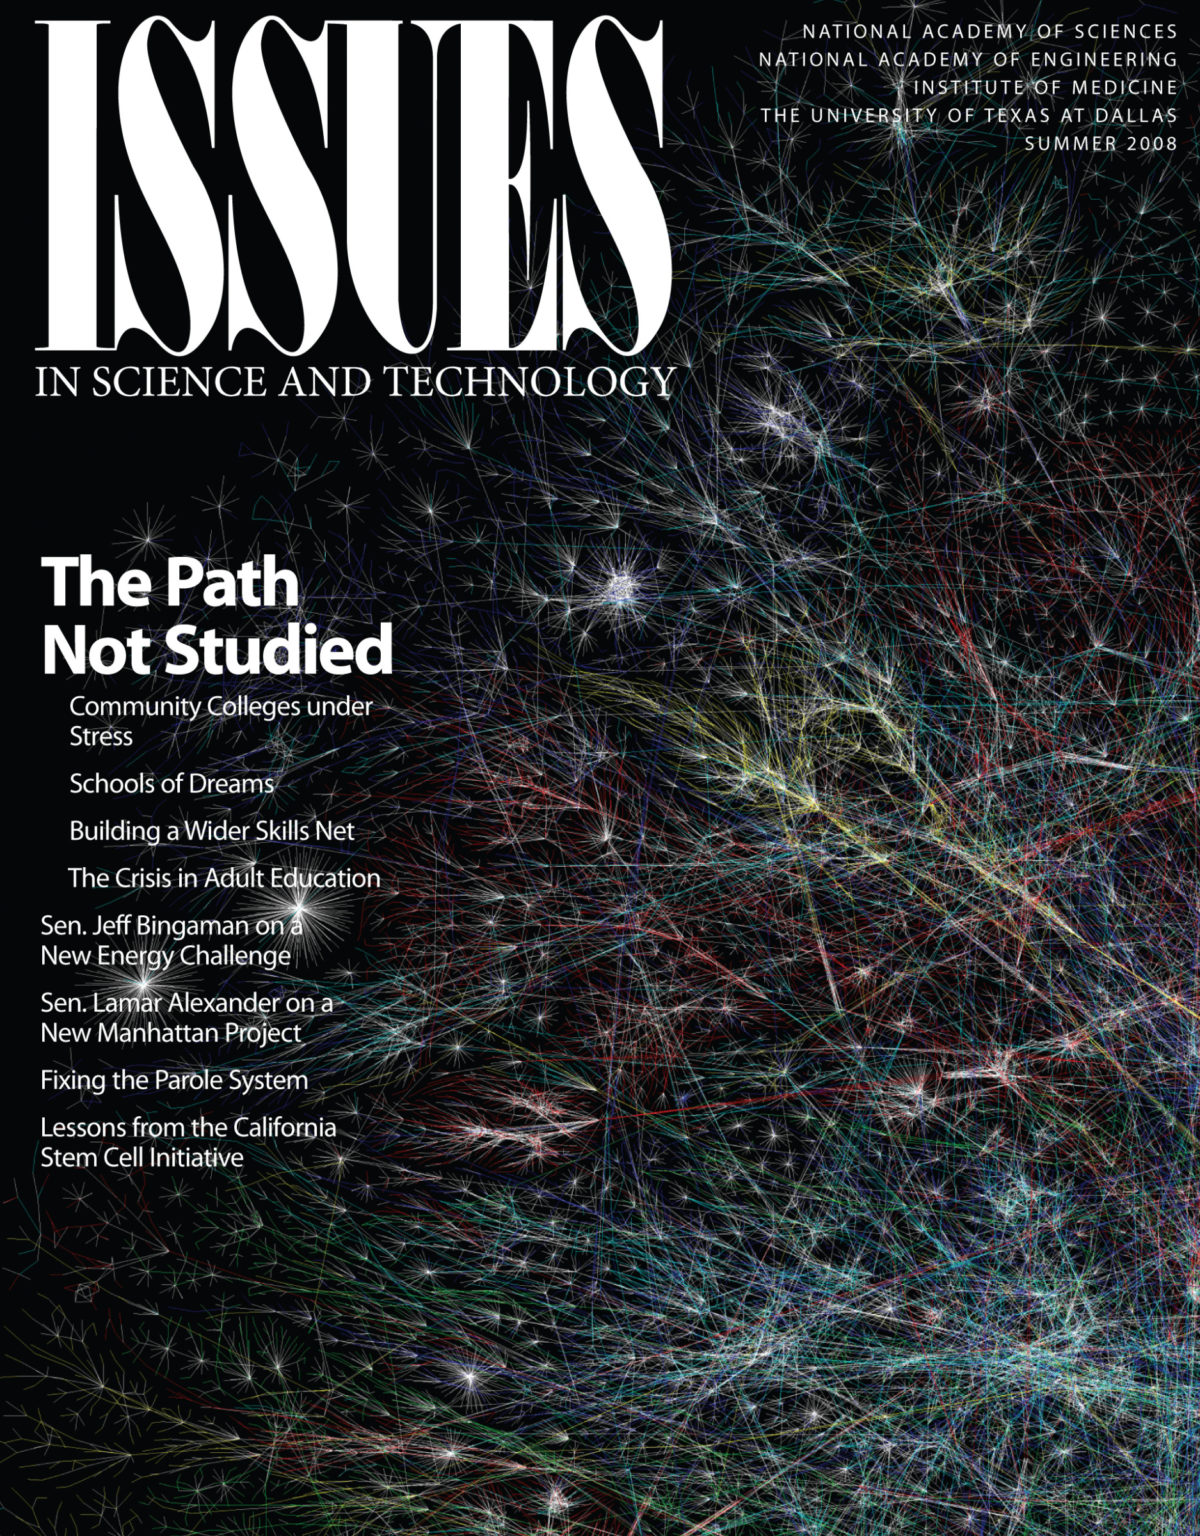 Magazine cover shows a recreation of synapsis in the brain